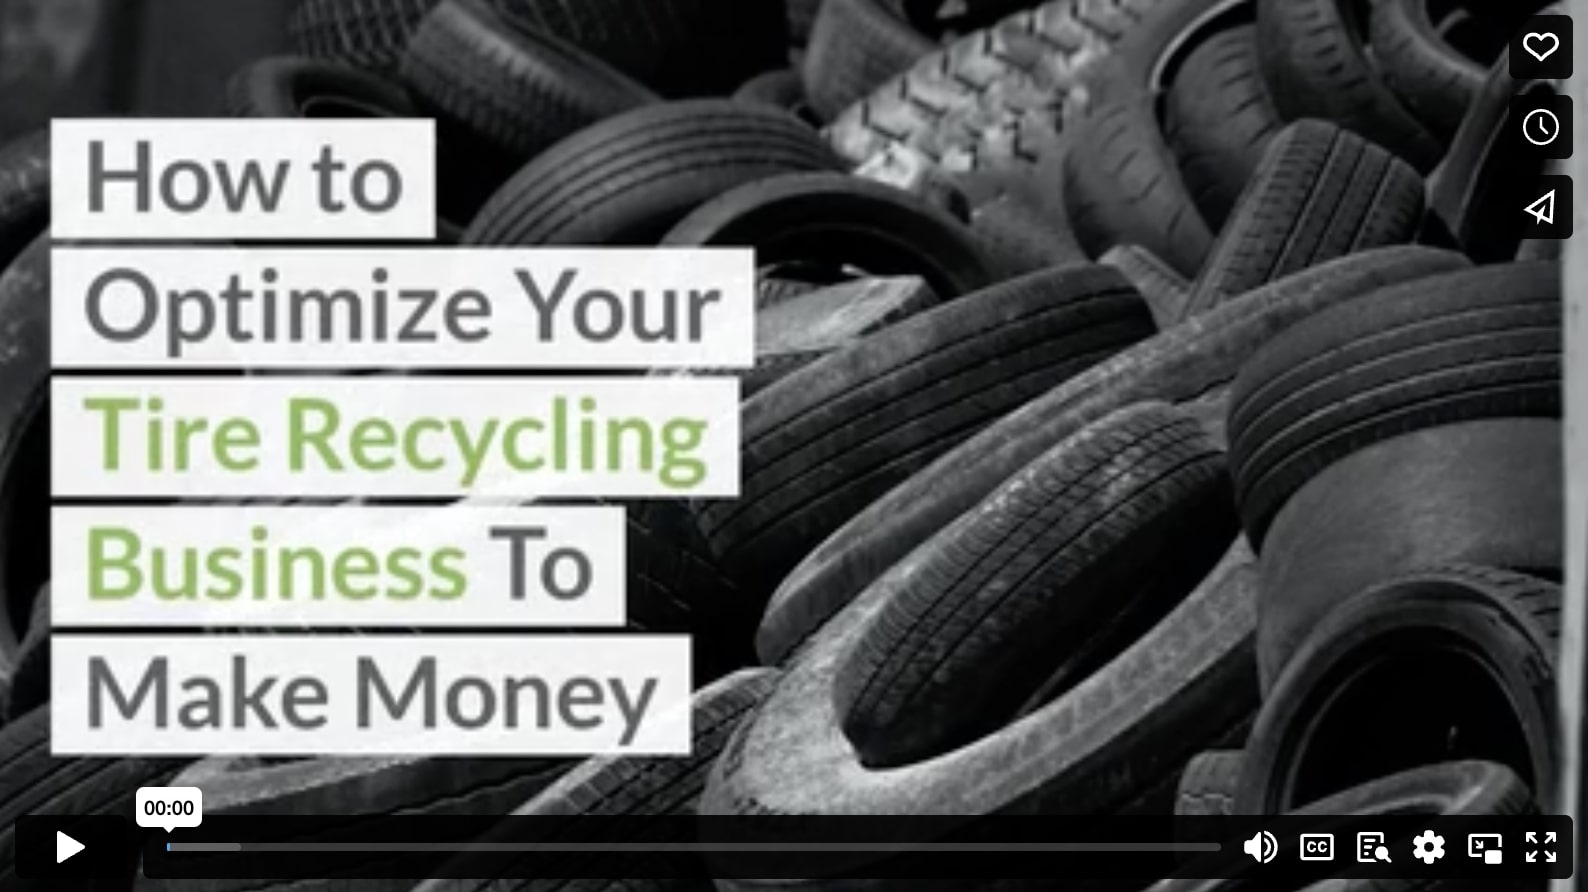 How to Optimize Your Tire Recycling Business To Make Money